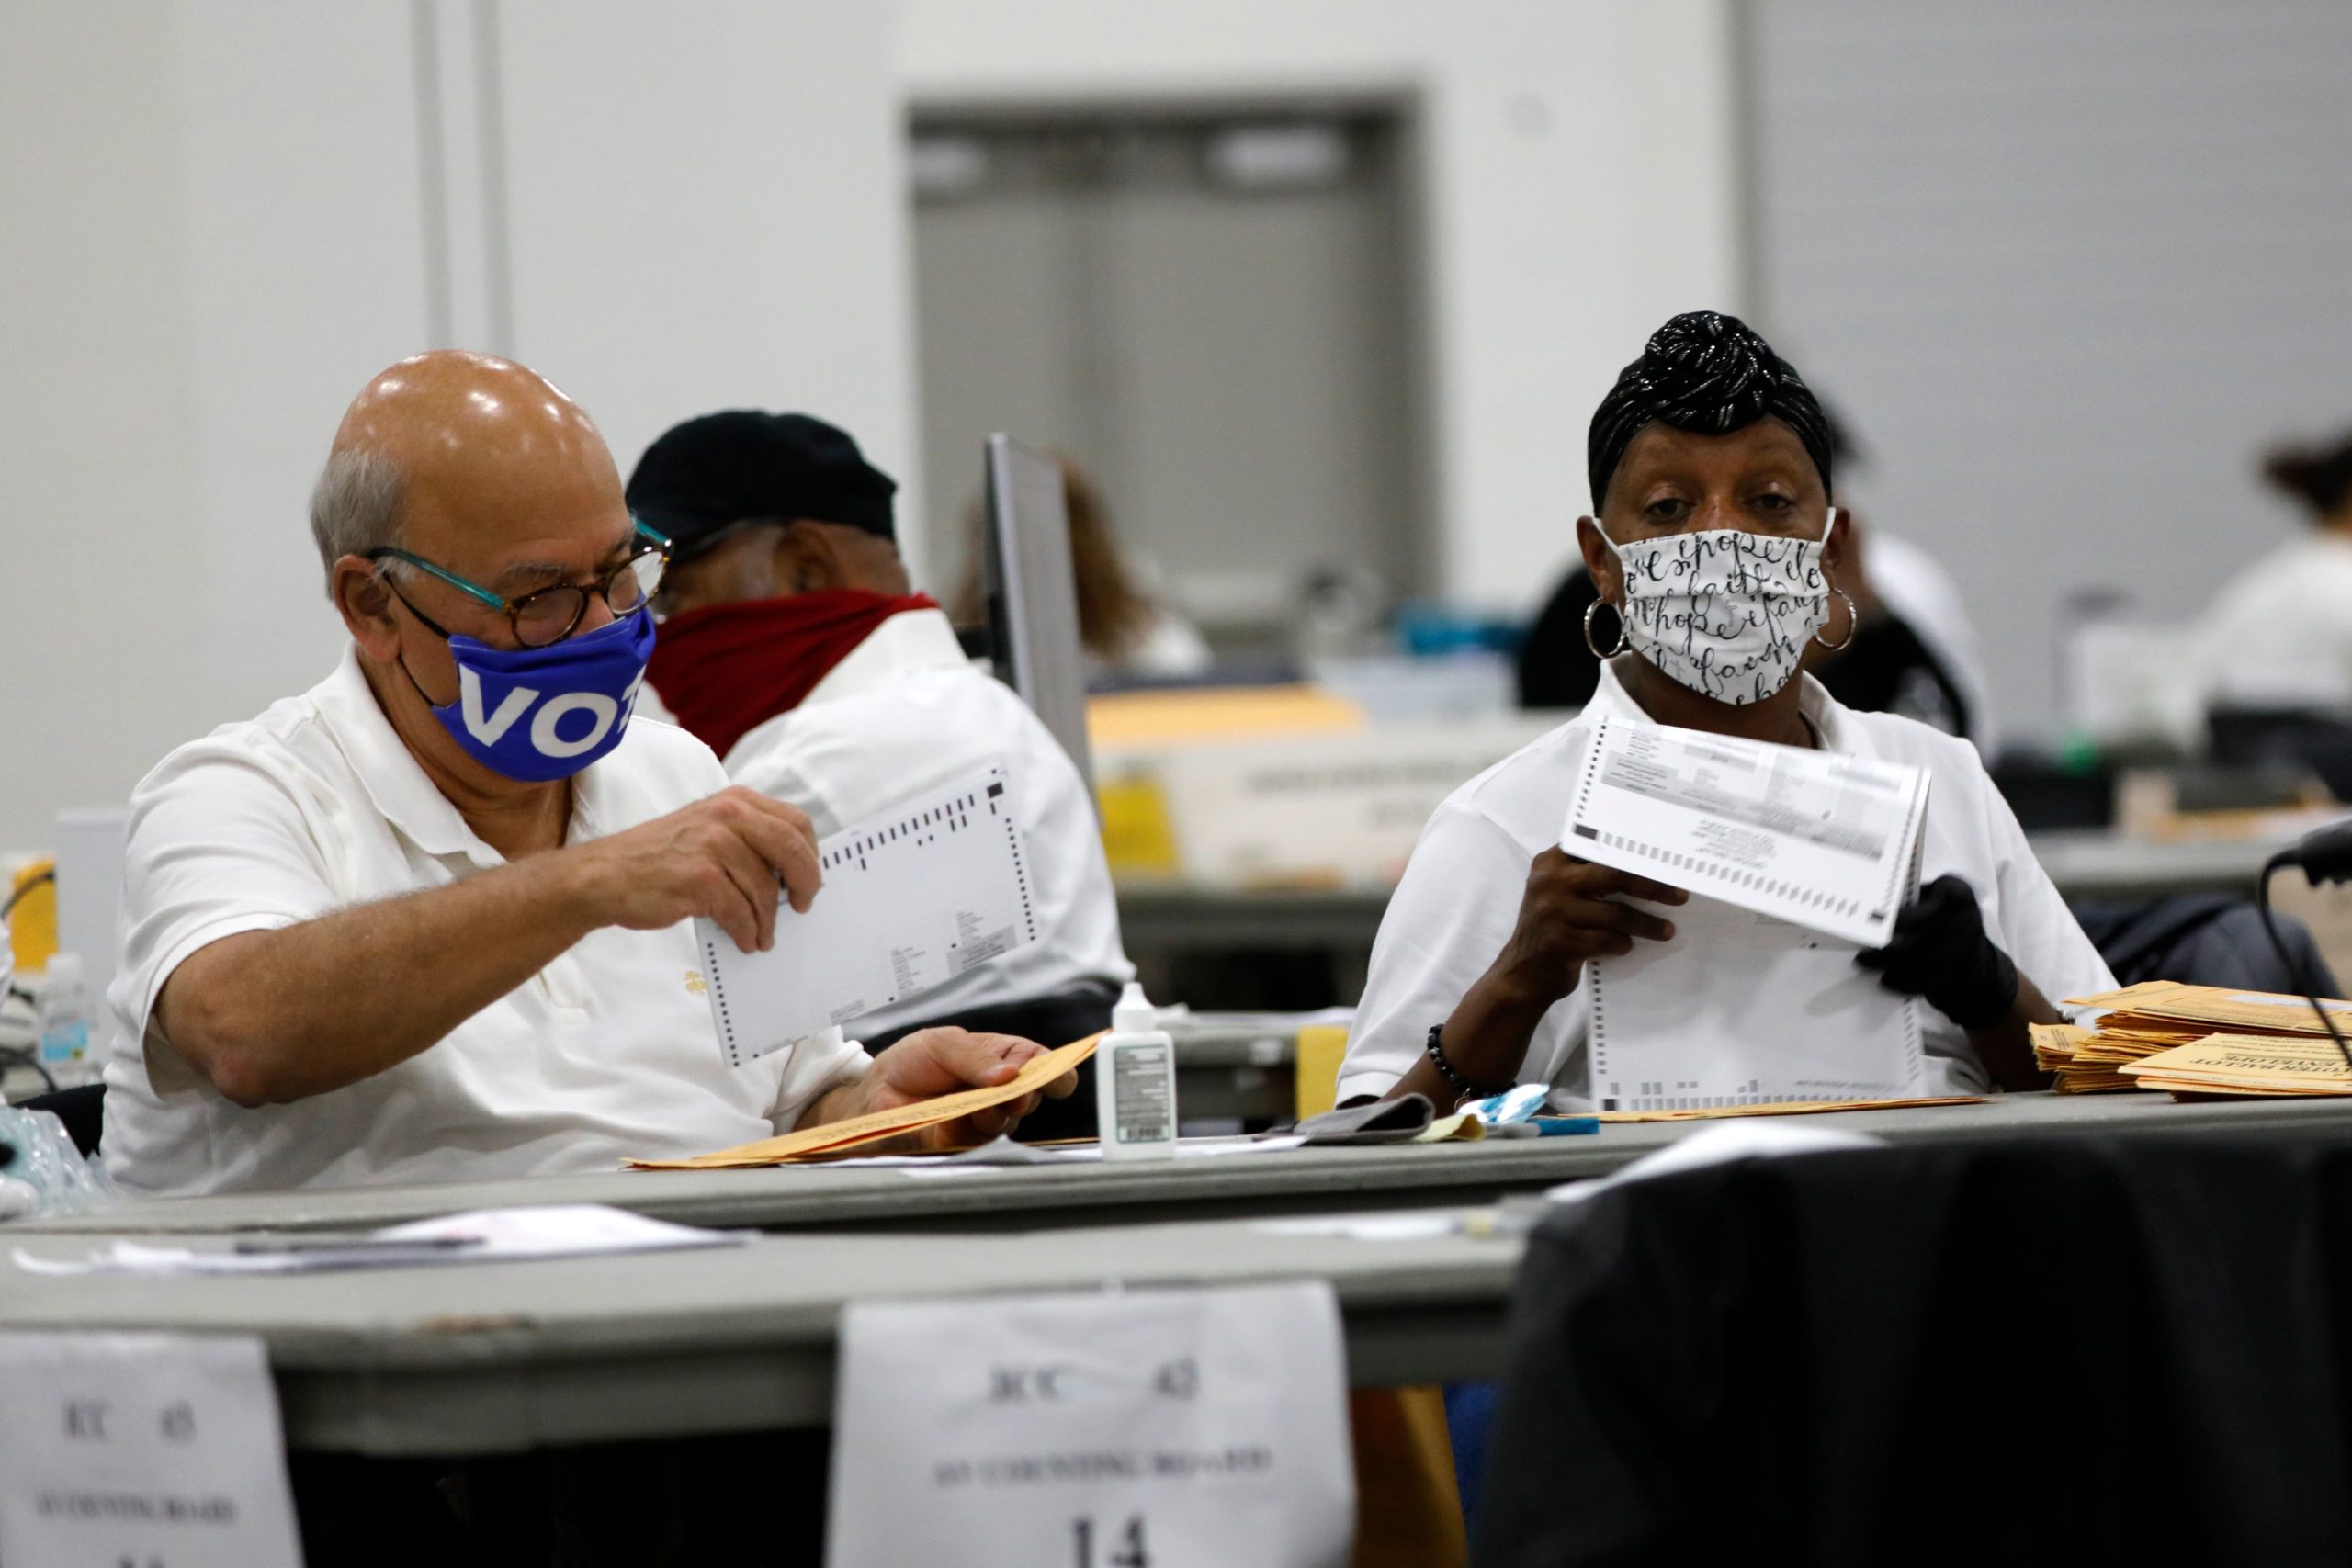 Detroit election workers work on counting absentee ballots for the 2020 general election early Wednesday in Detroit, Michigan. (Jeff Kowalsky/AFP via Getty Images)